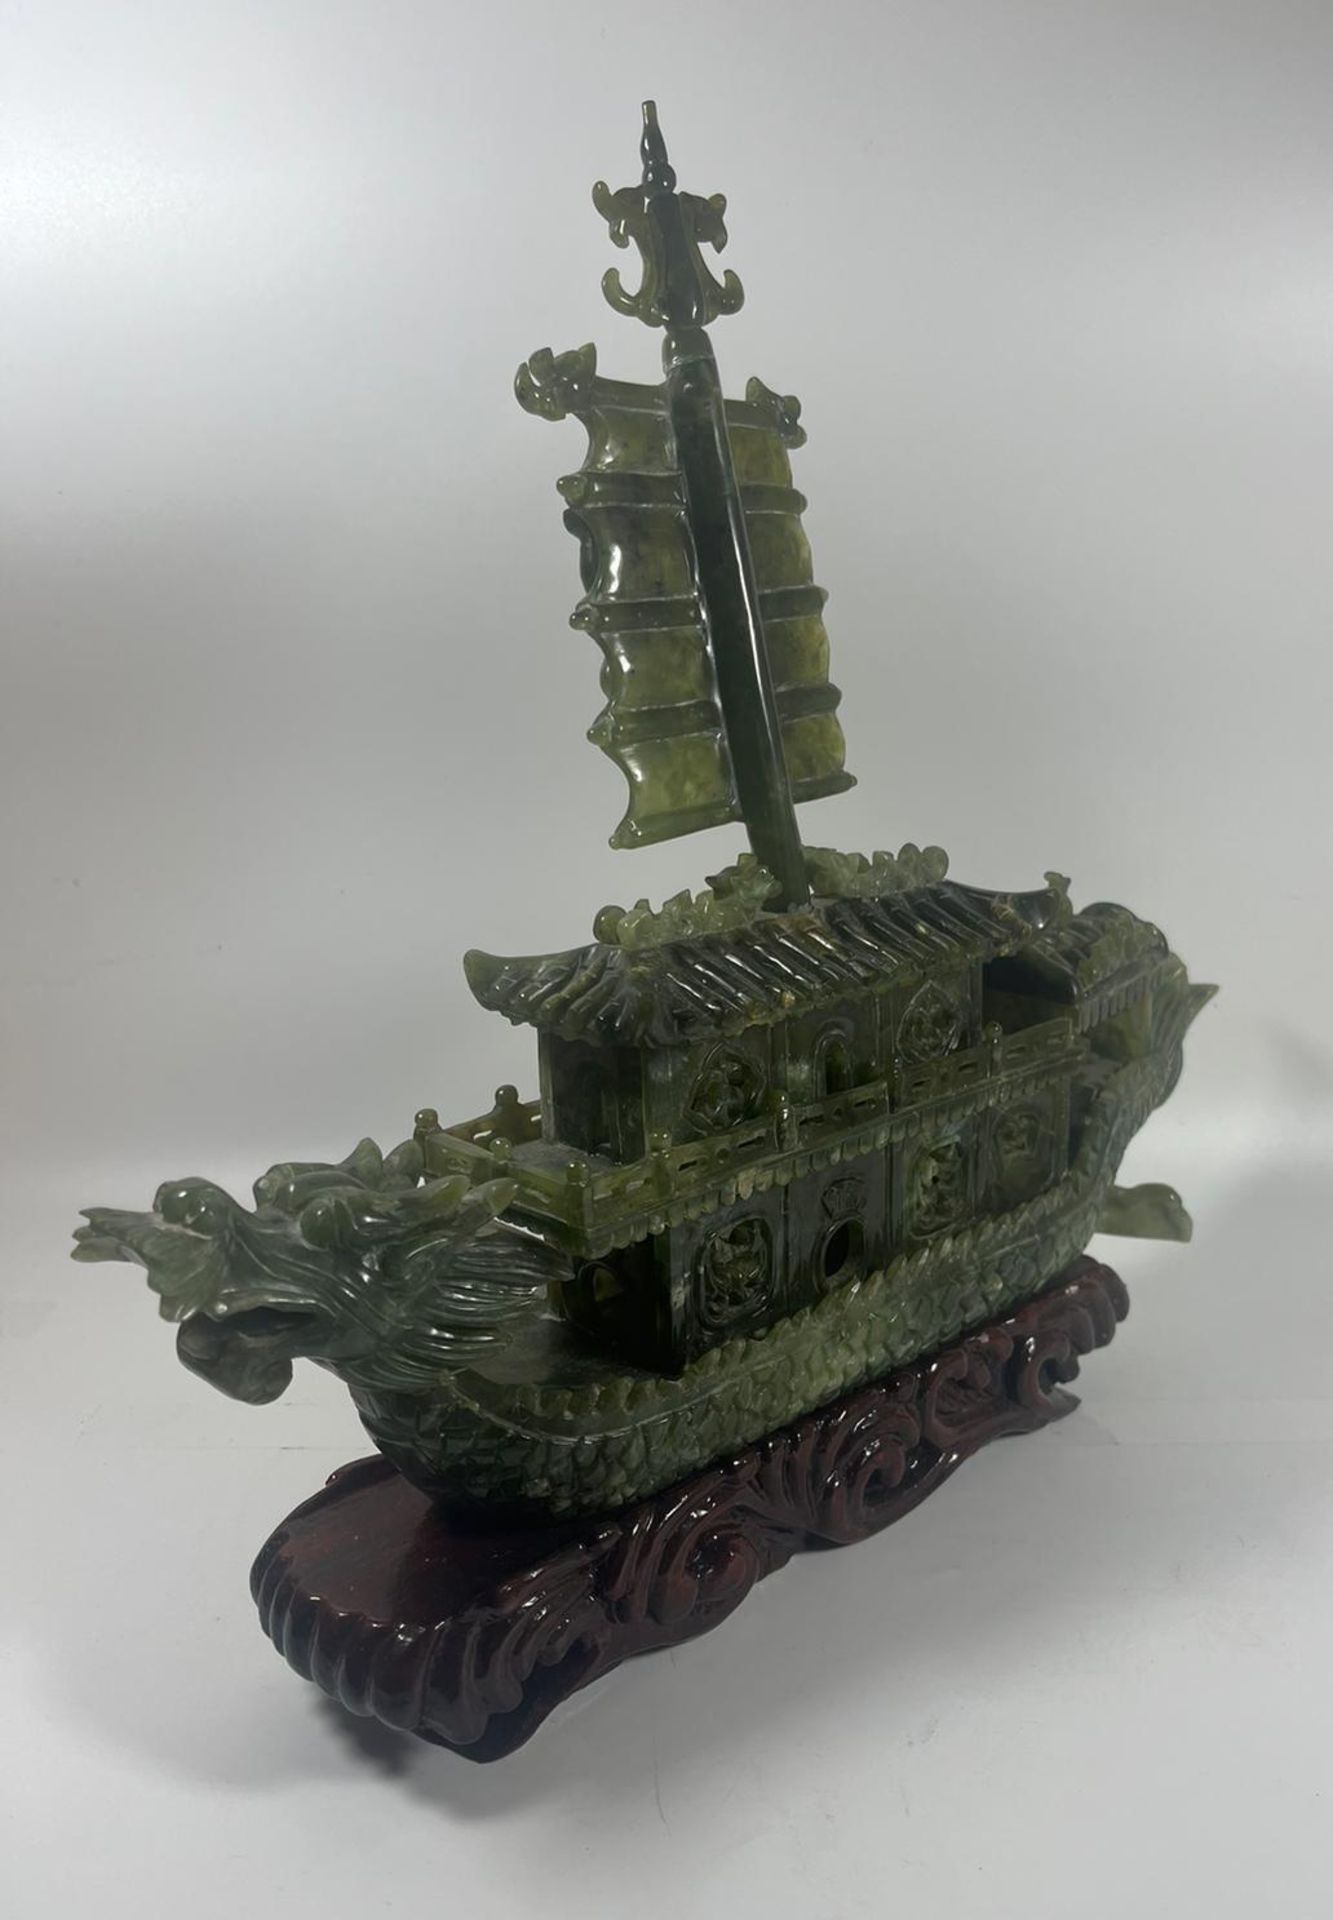 A CHINESE CARVED JADE TYPE GREEN HARDSTONE DRAGON DESIGN BOAT SCULPTURE ON WOODEN BASE, LENGTH 34CM - Image 4 of 6